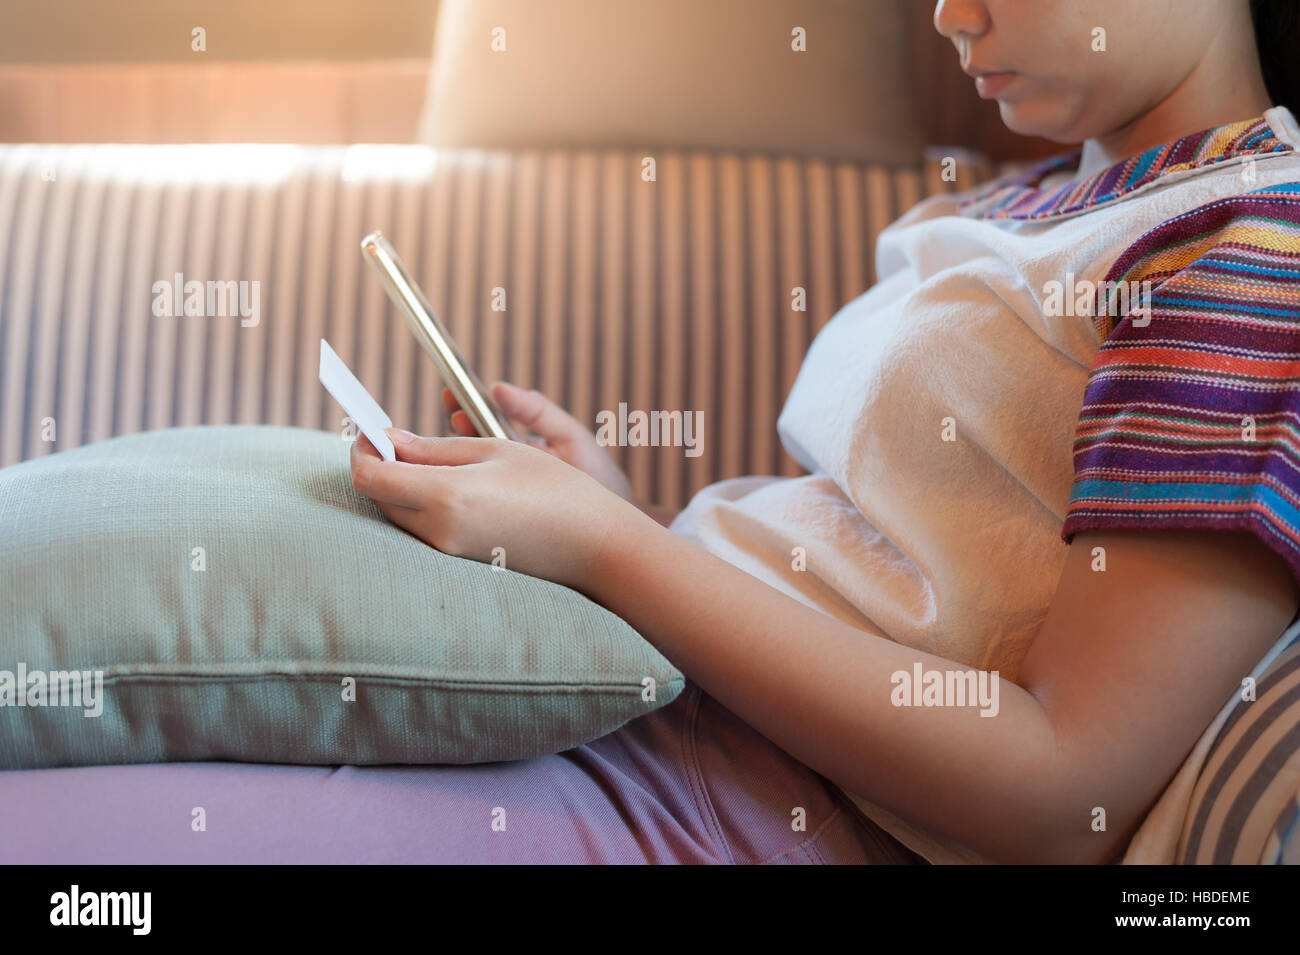 Trendy weekend lifestyle. Young woman using phone for on line shopping and another hand holding credit card while sitting on a couch. Shopping at home Stock Photo